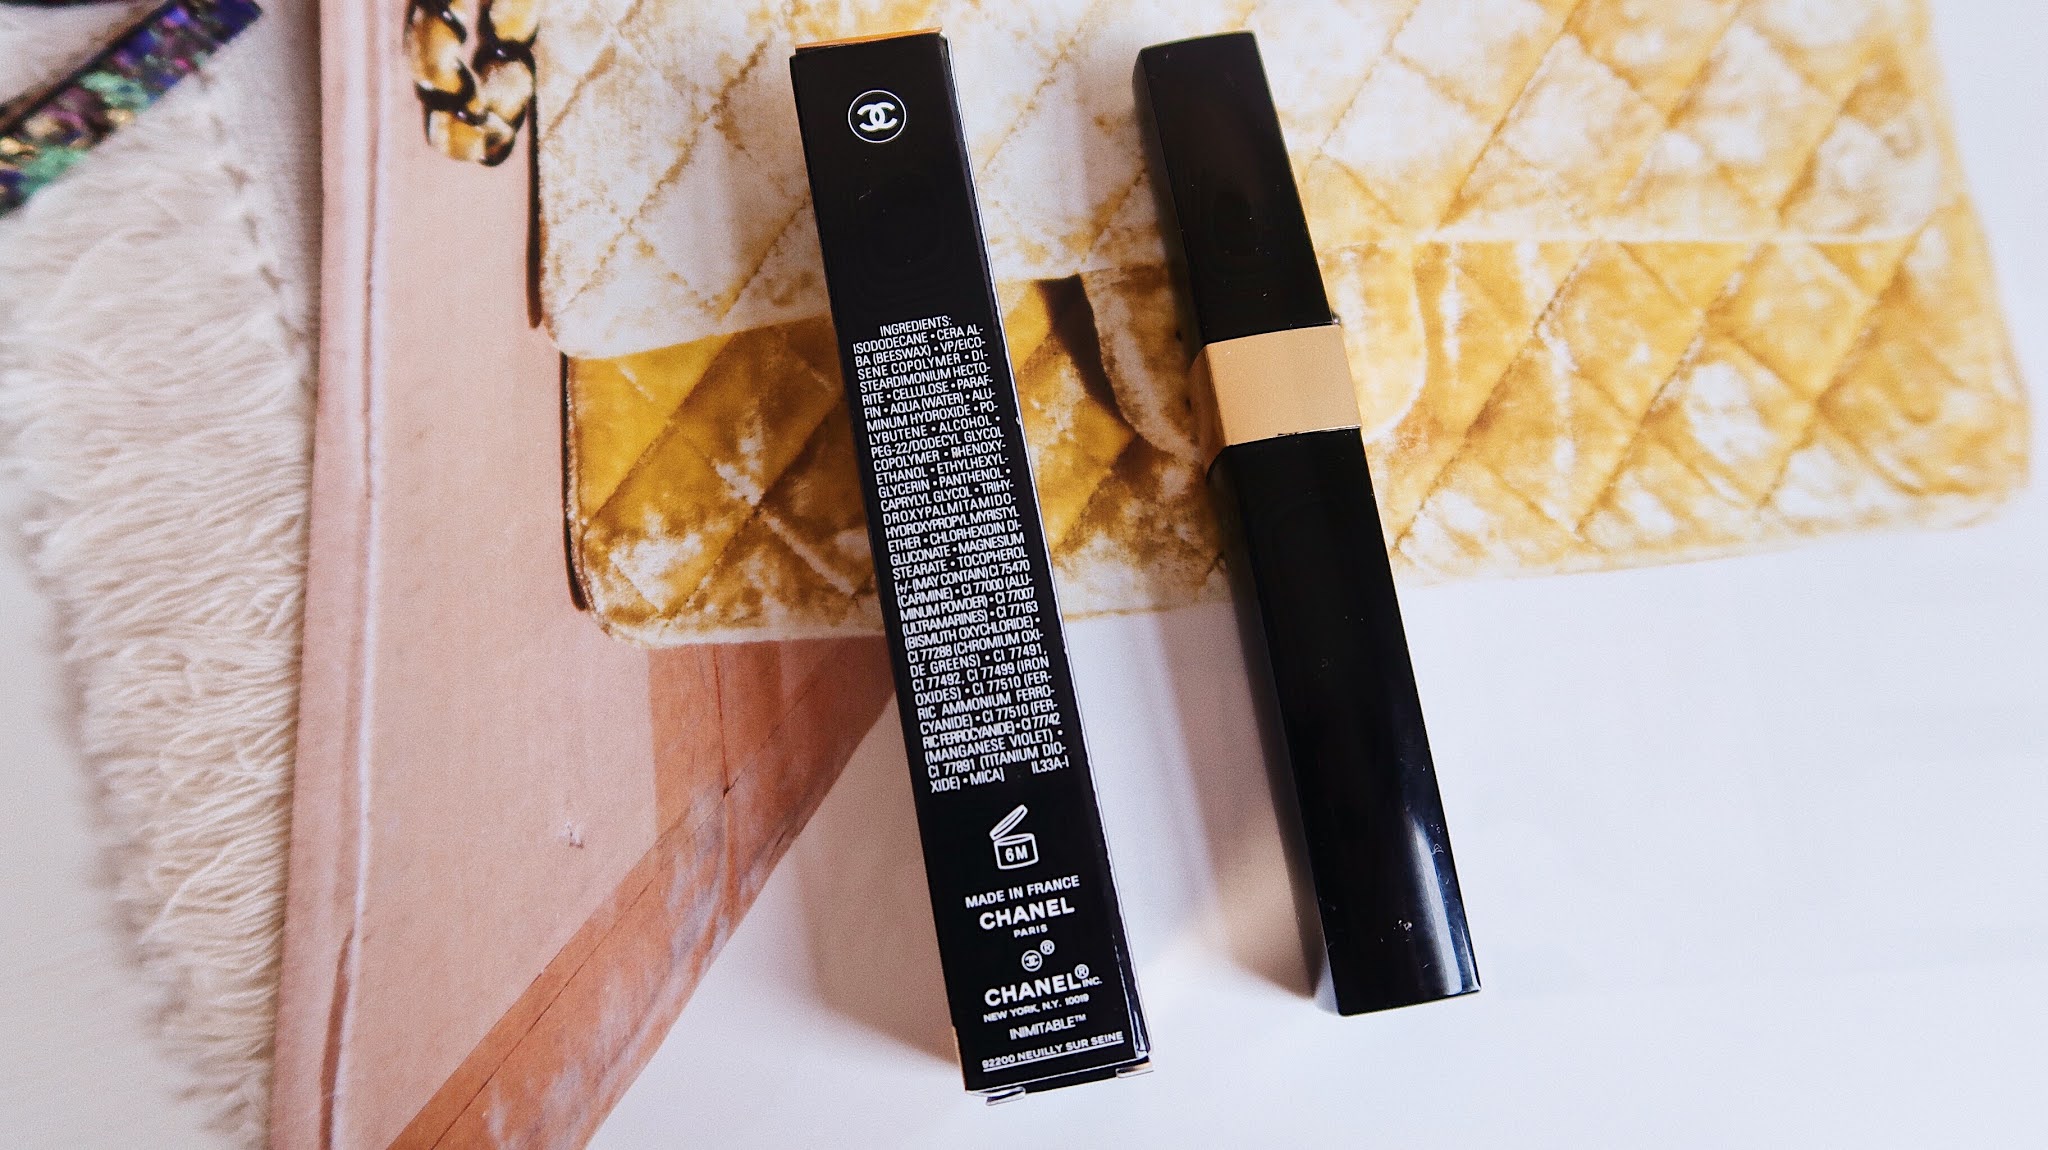 Chanel Inimitable Waterproof Mascara Review — Giselle Arianne